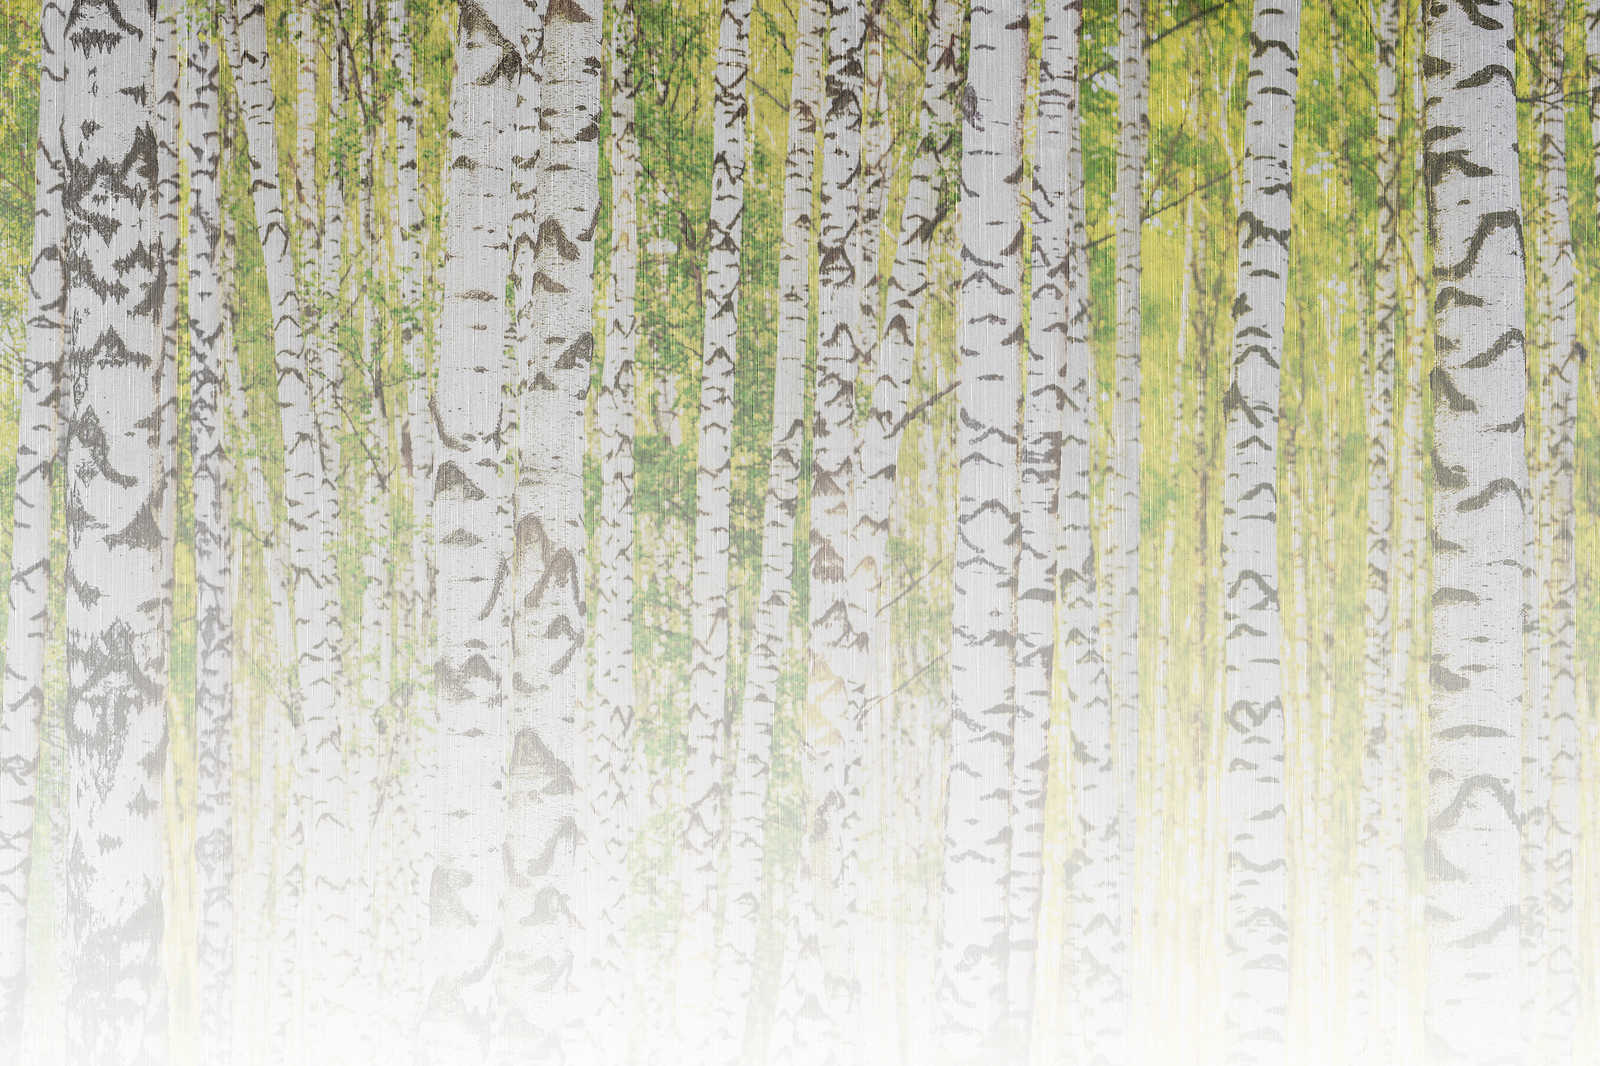             Canvas painting with birch forest in linen structure look - 0.90 m x 0.60 m
        